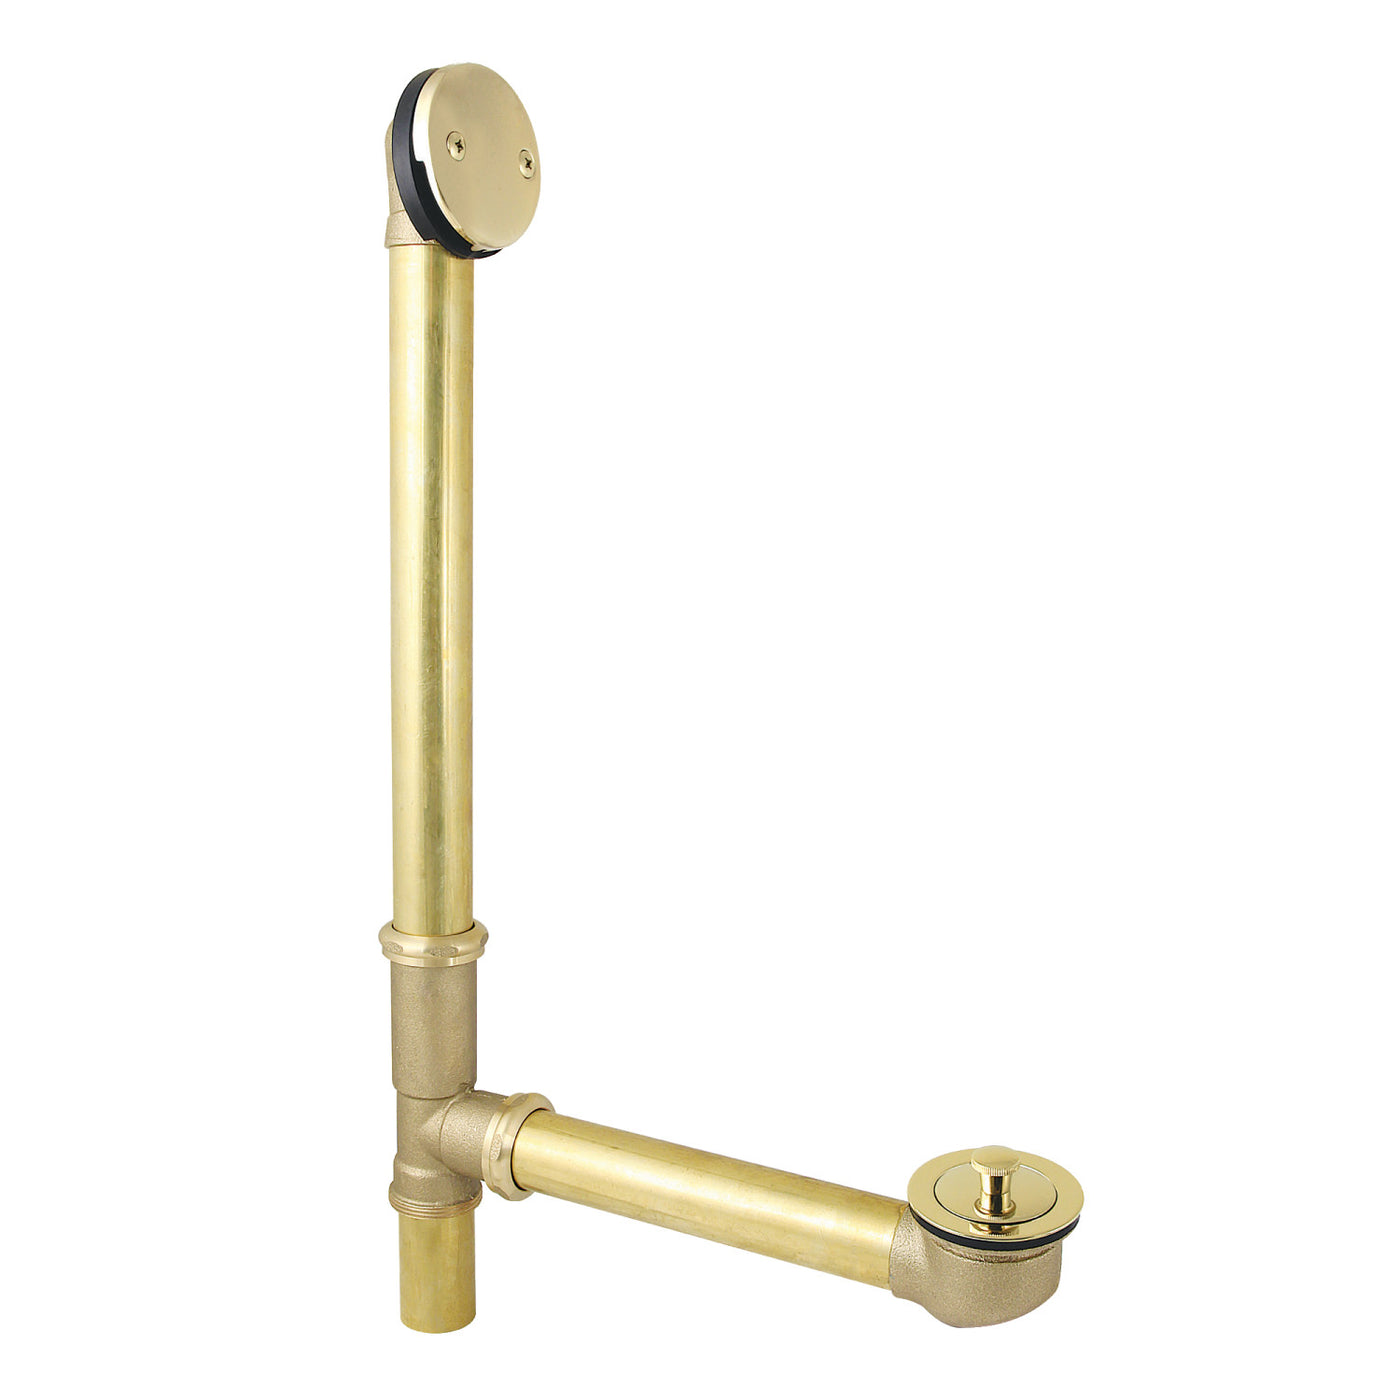 Elements of Design EDLL3162 21-Inch Lift and Lock Tub Waste and Overflow, 20 Gauge, Polished Brass